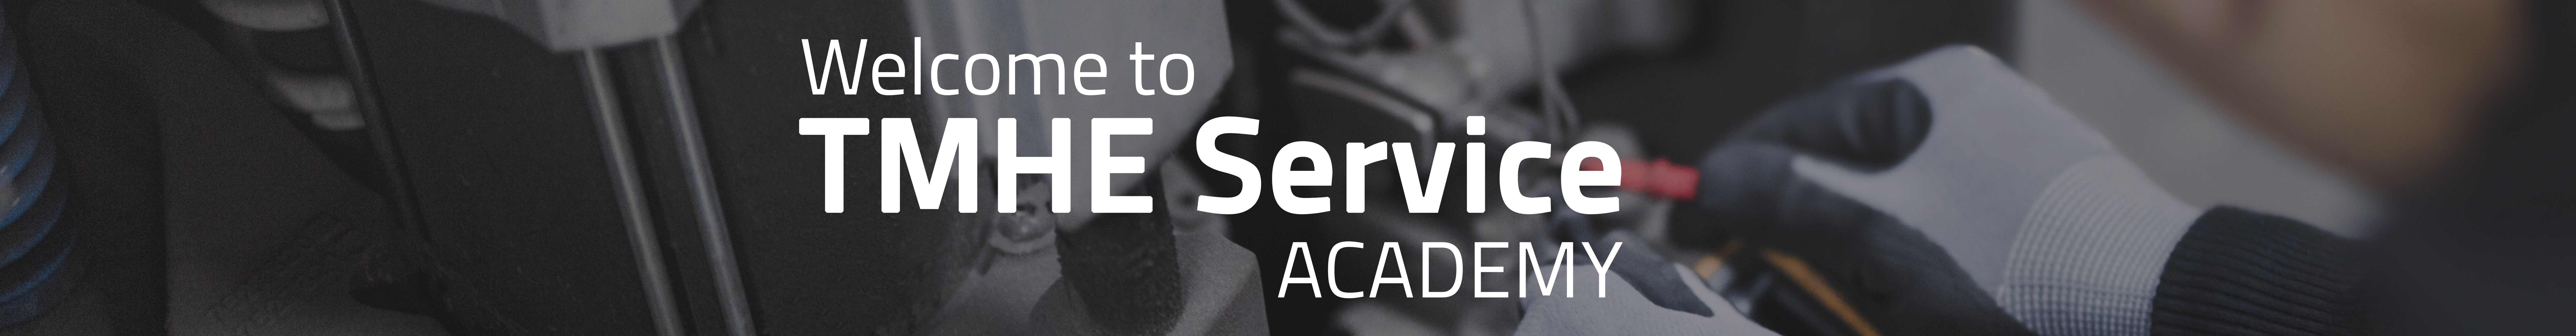 Welcome To TMHE Service Academy